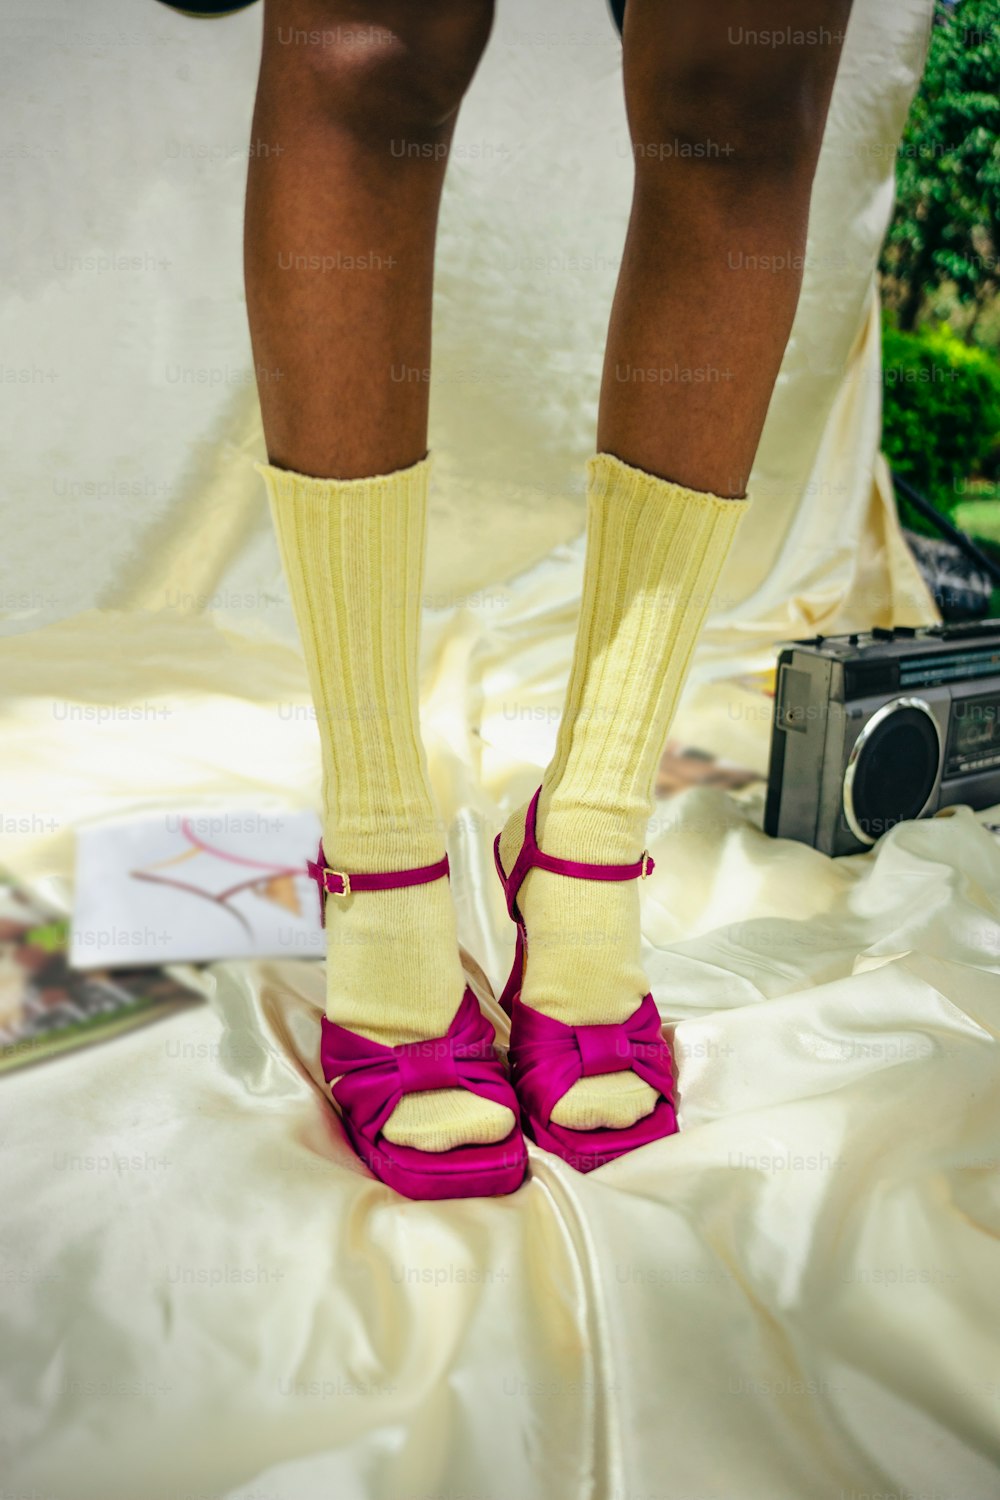 a person wearing yellow socks and pink shoes